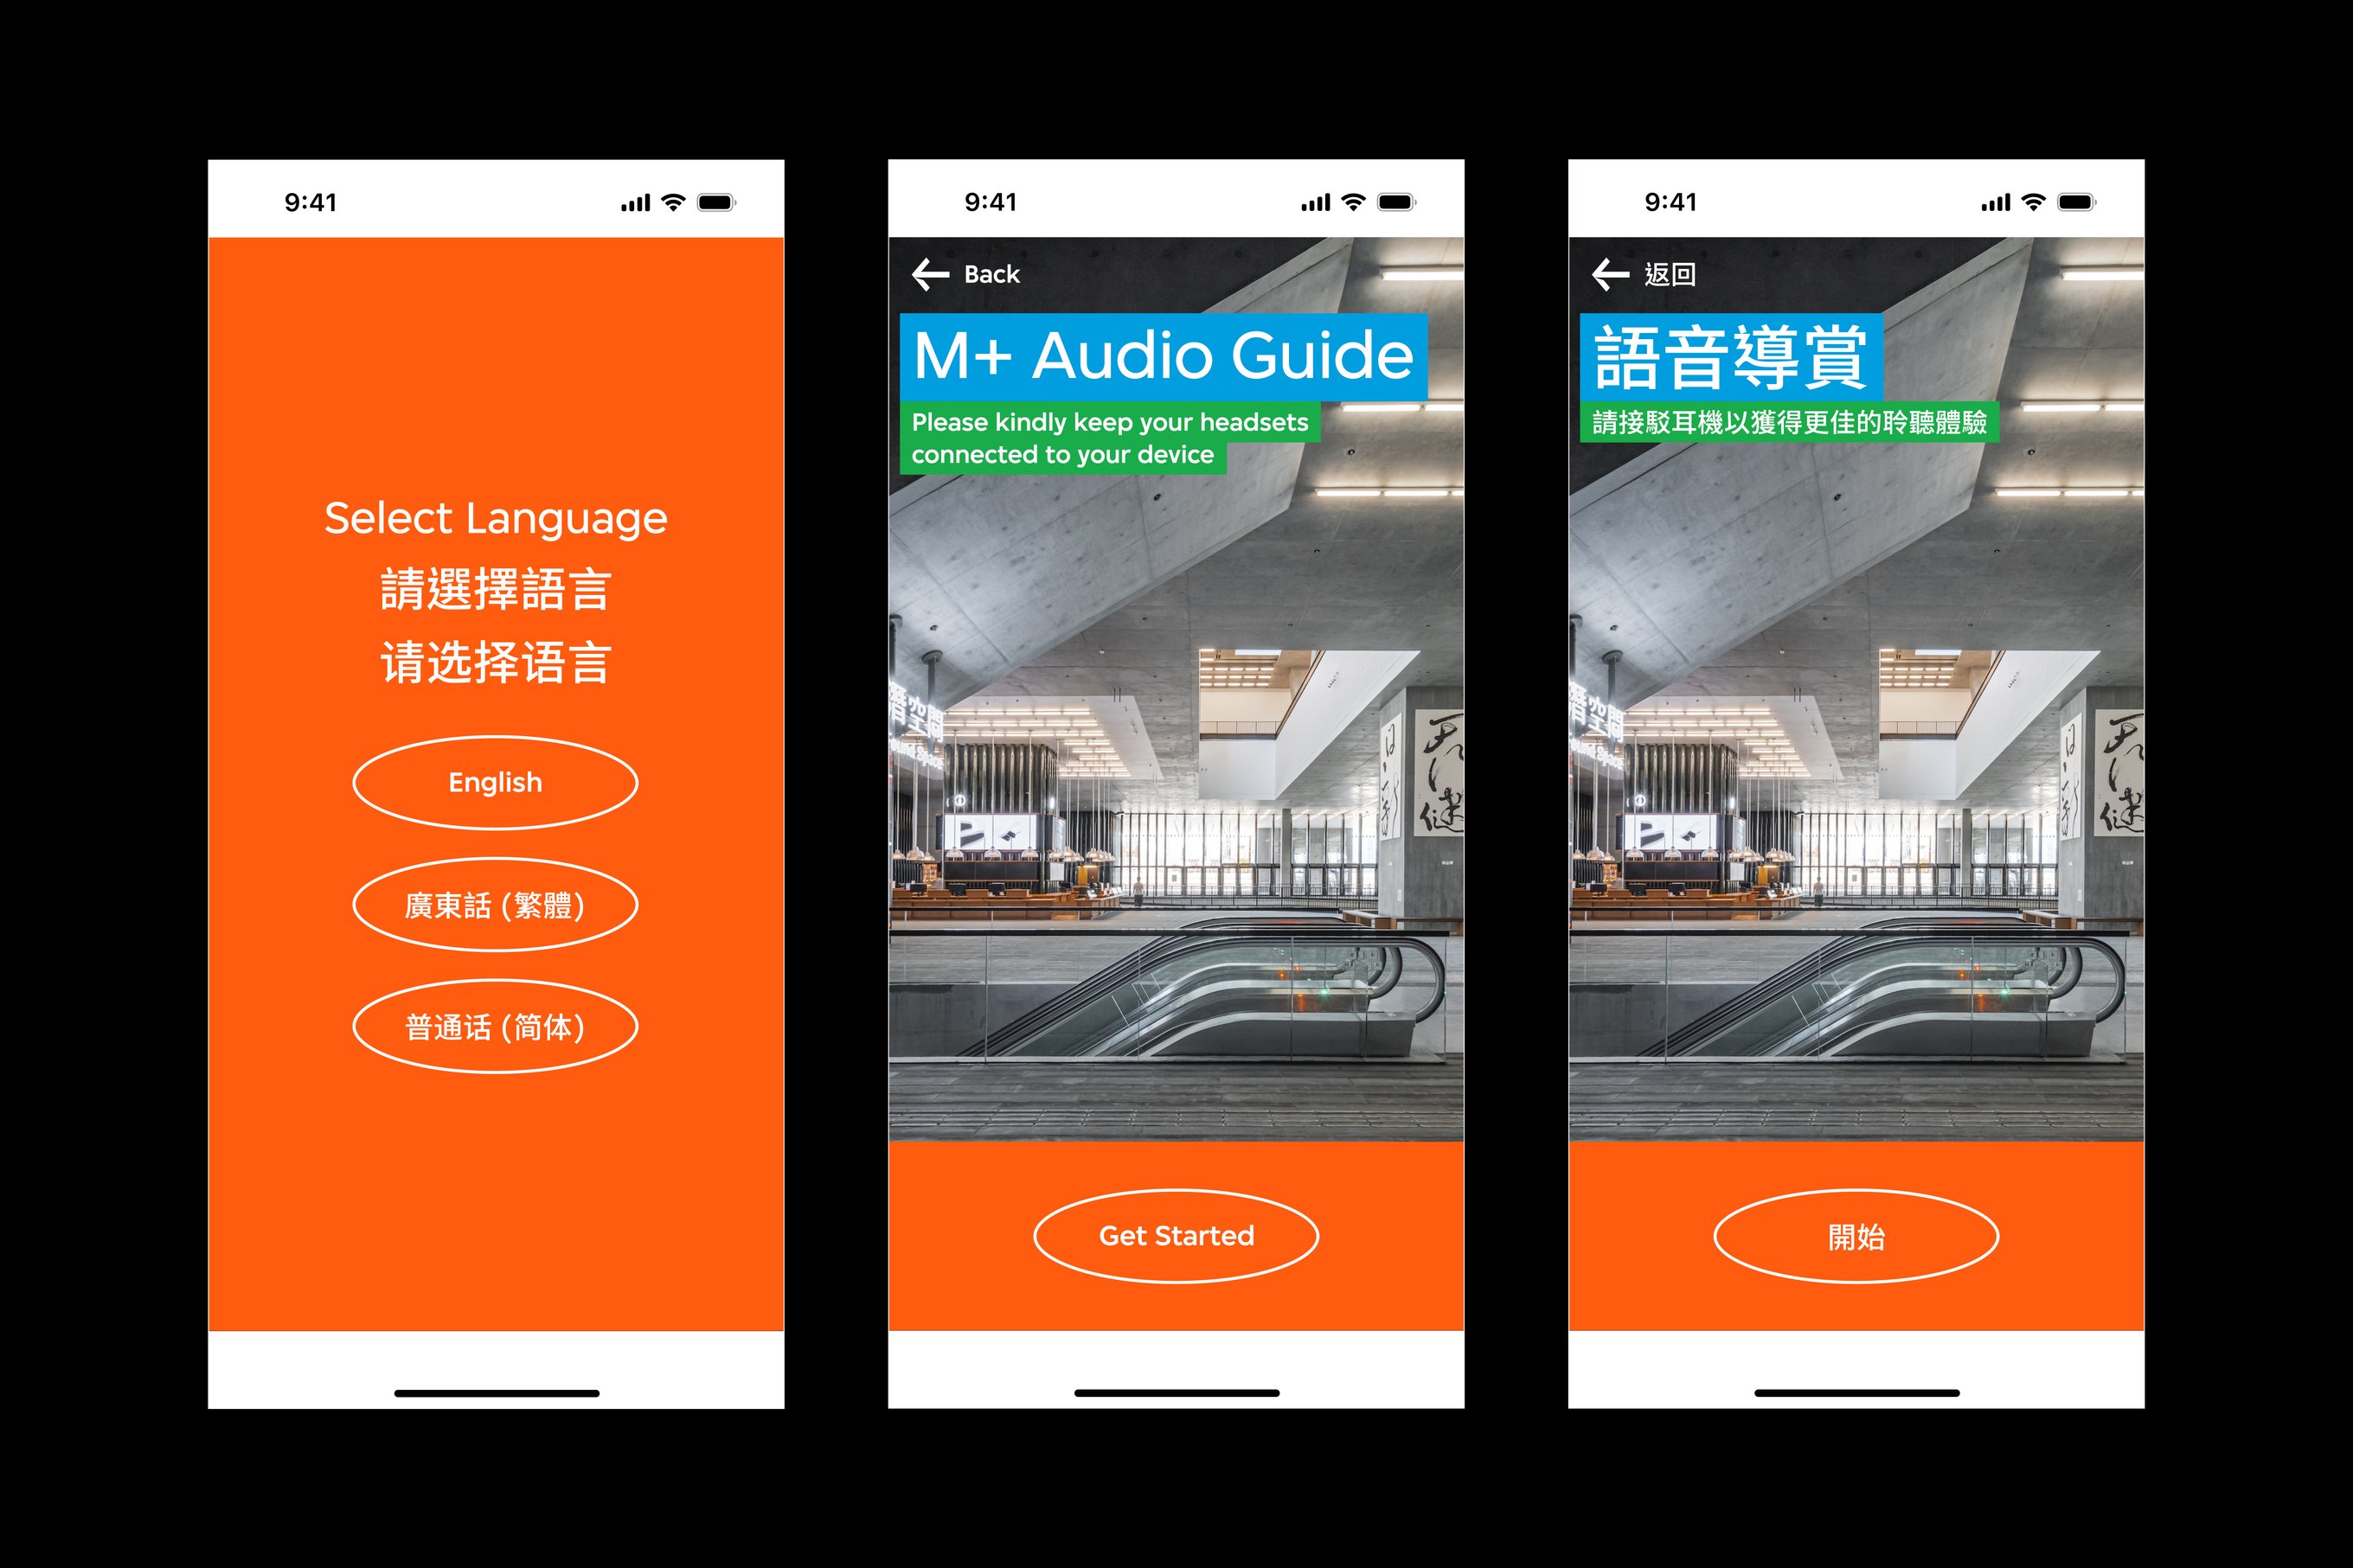 There are three audio guide interfaces. The first interface features the language selection page with three options. The second and third interface features the start-up screen in English and Traditional Chinese.